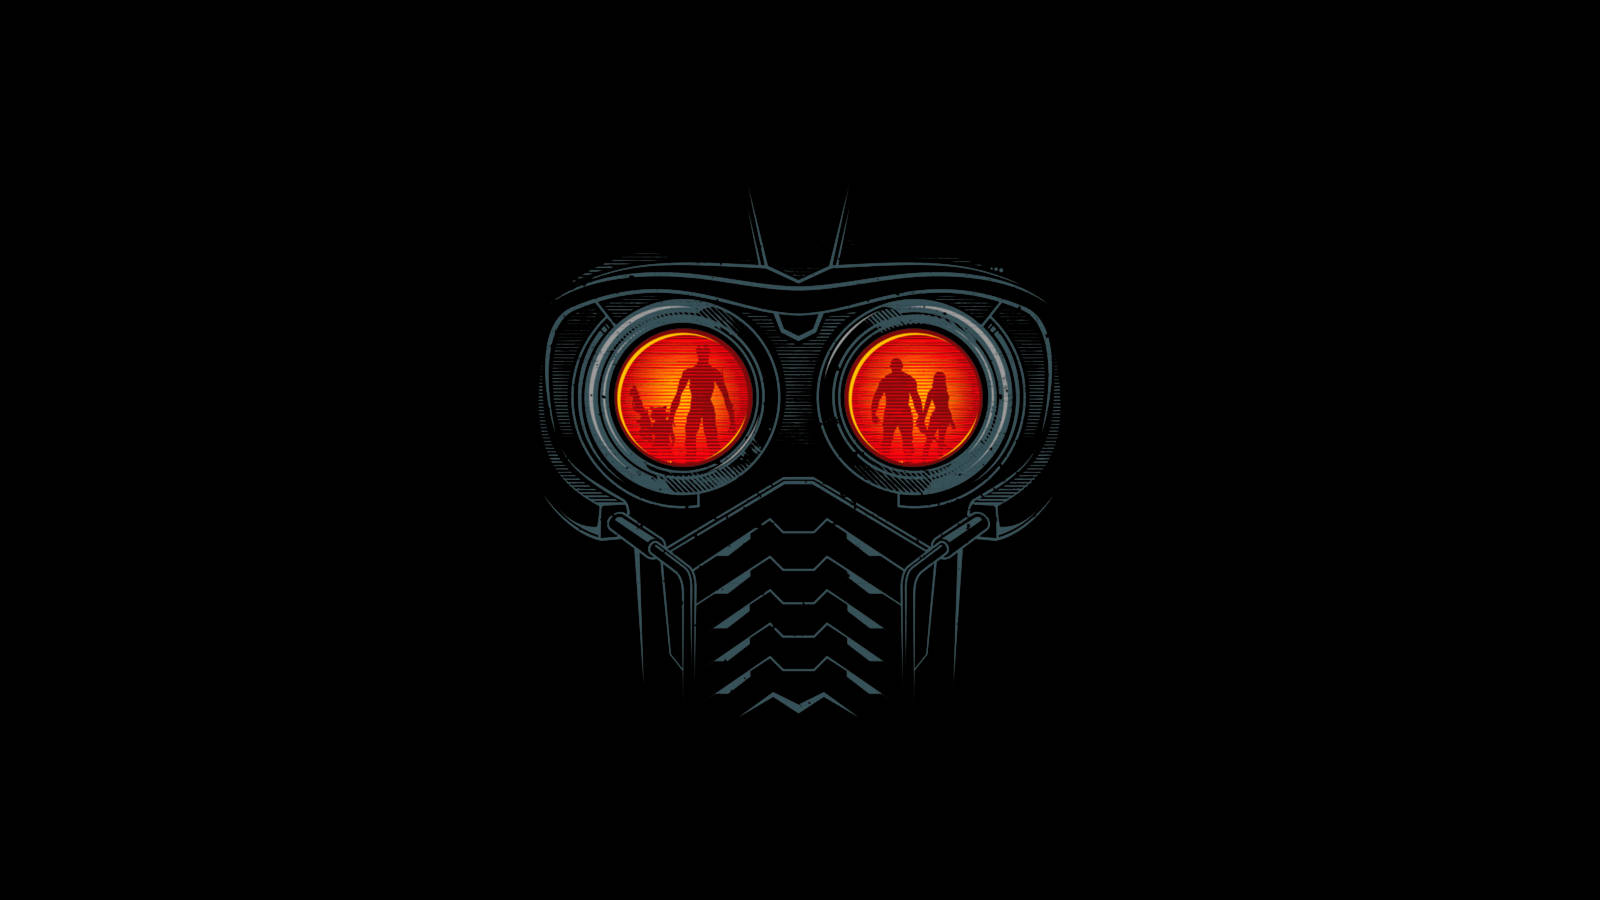 Guardians Of The Galaxy Star-Lord Mask Wallpaper